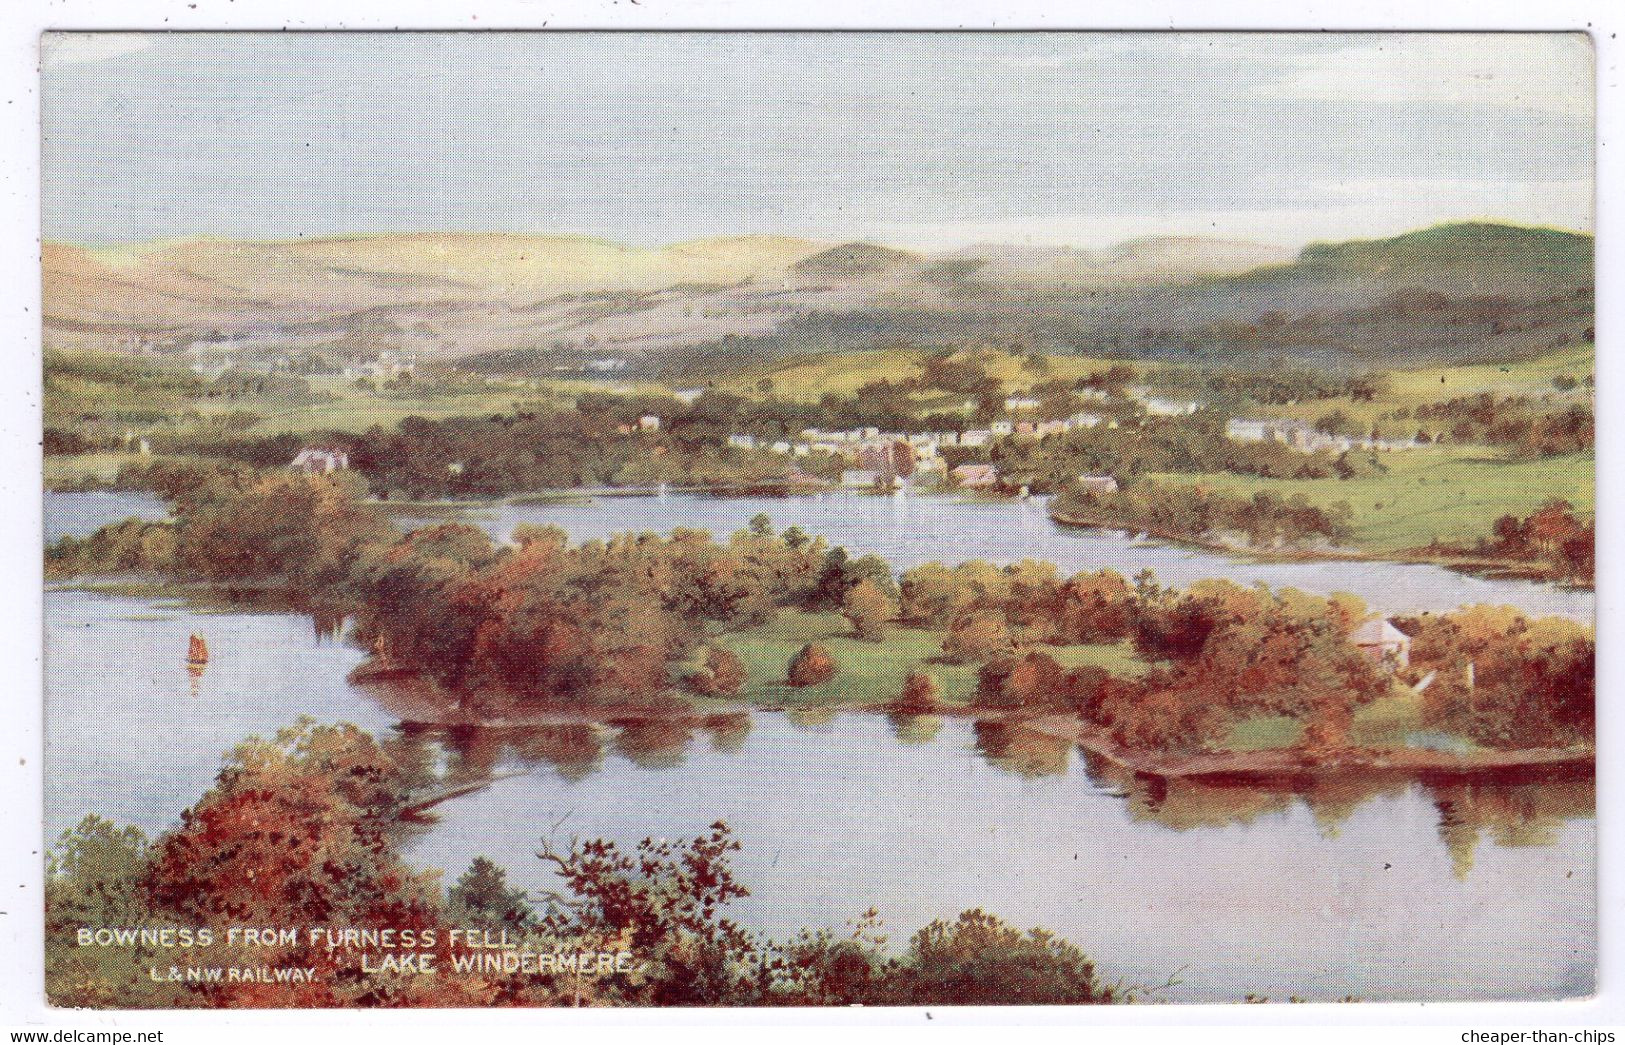 LONDON & NORTH WESTERN RAILWAY COMPANY - Bowness From Furness Fell - Windermere